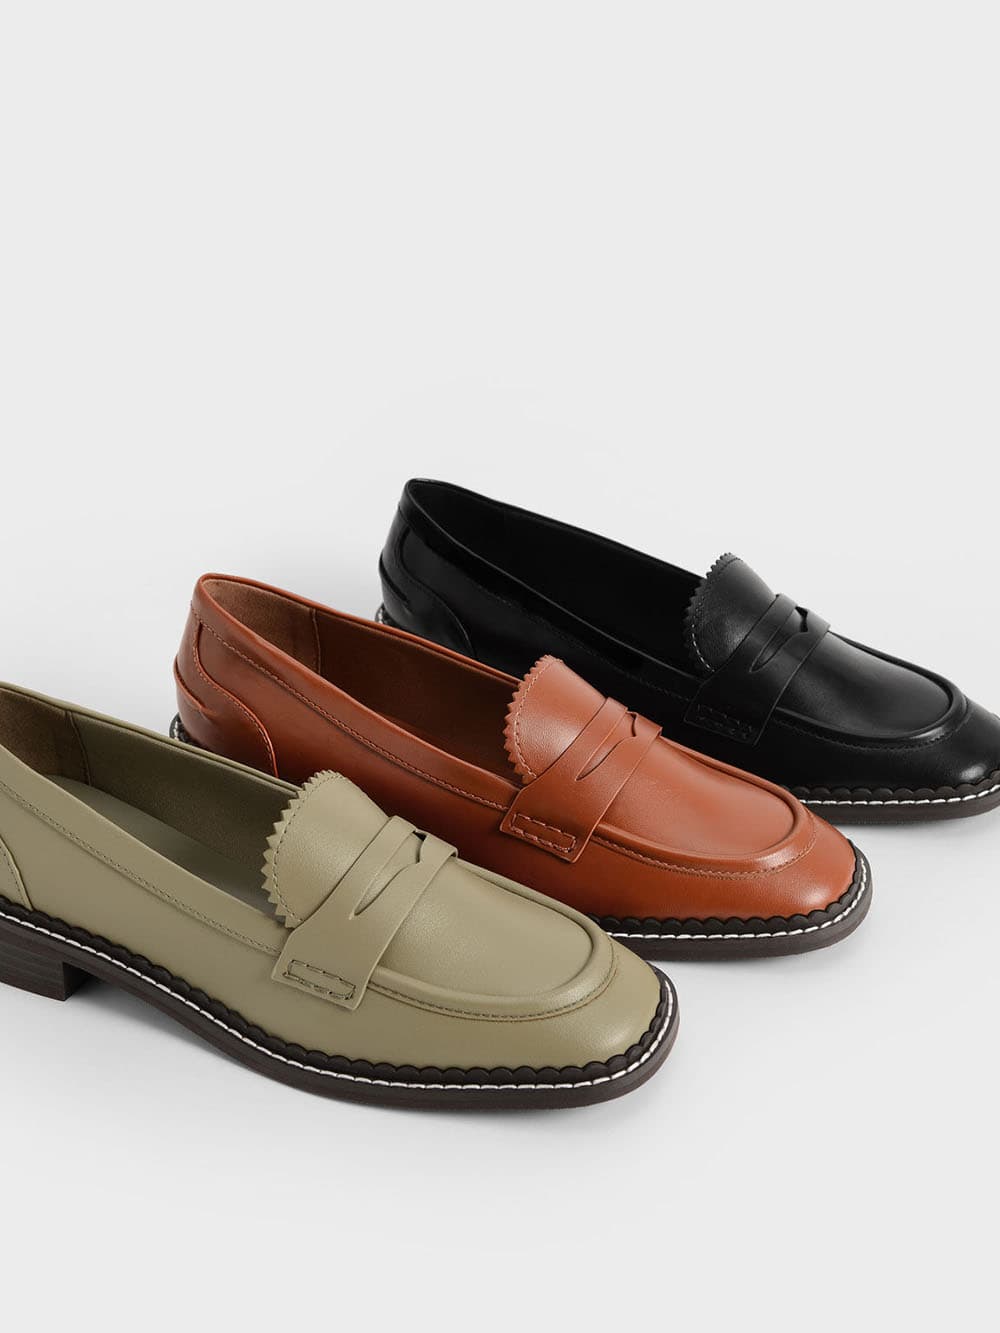 Women's scallop-trim penny loafers in olive, cognac, black - CHARLES & KEITH